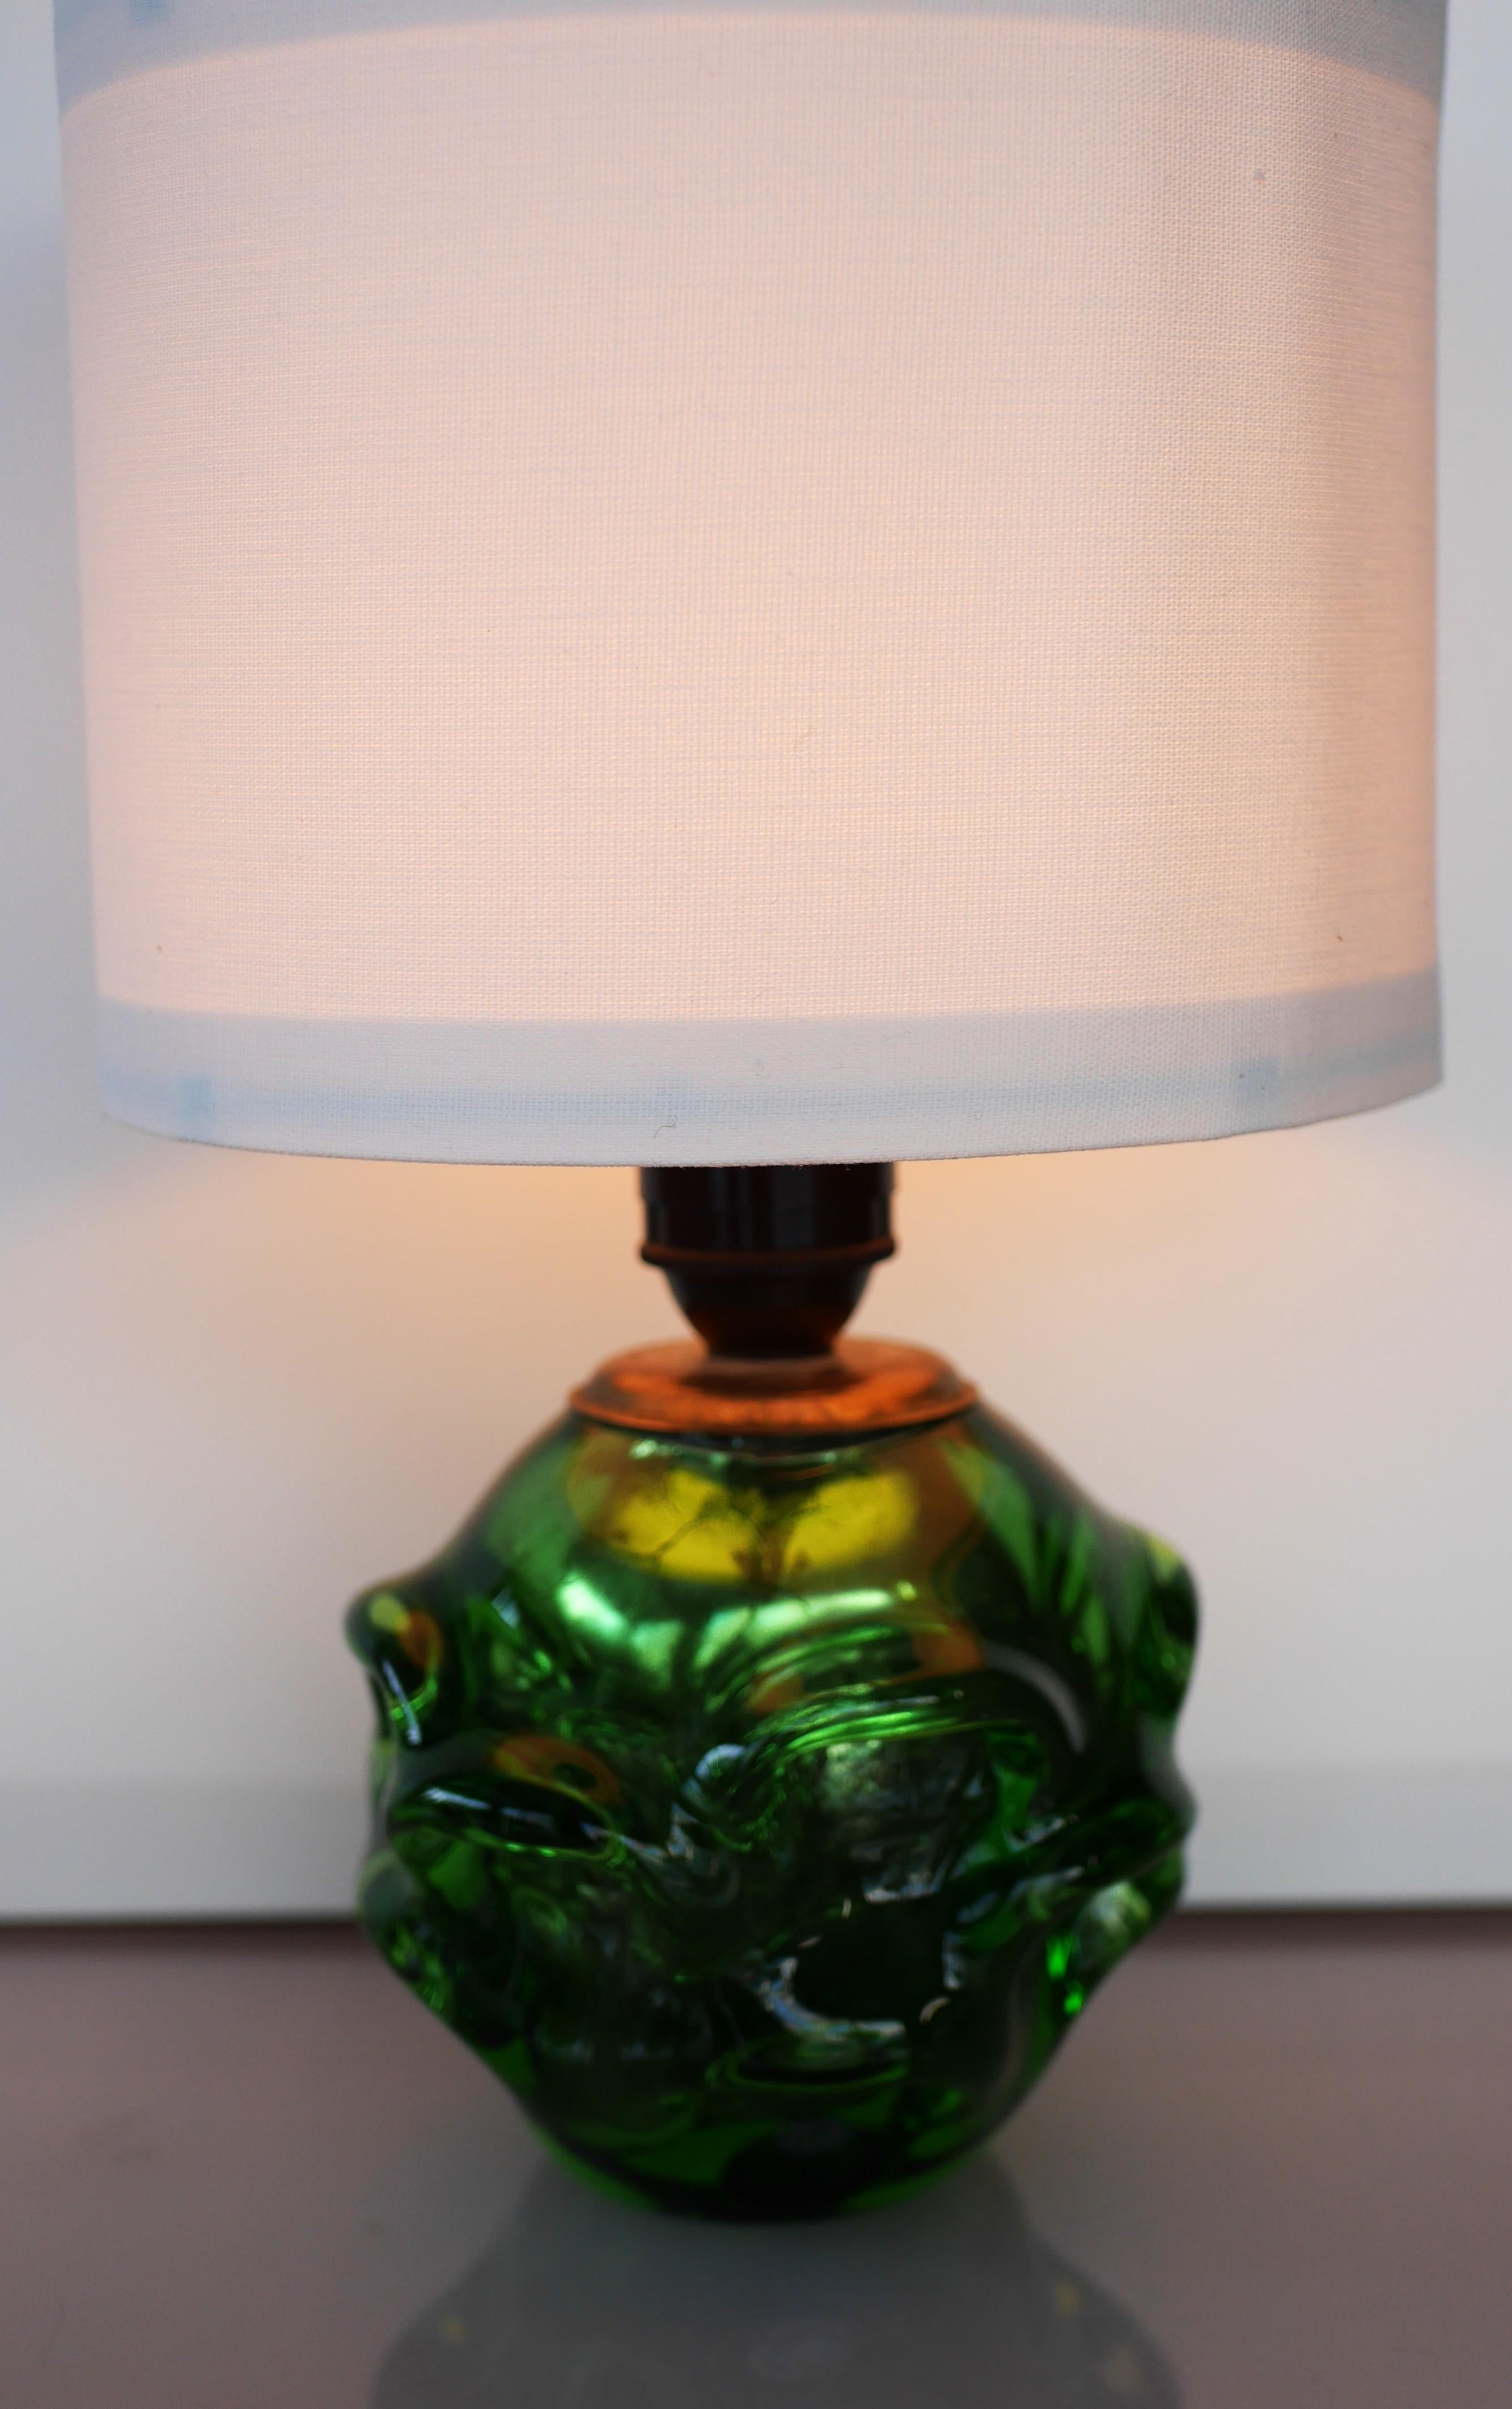 Hand-Crafted A Gorgeous Emerald Green Glass Lamp by Börne Augustsson for Åseda, Sweden